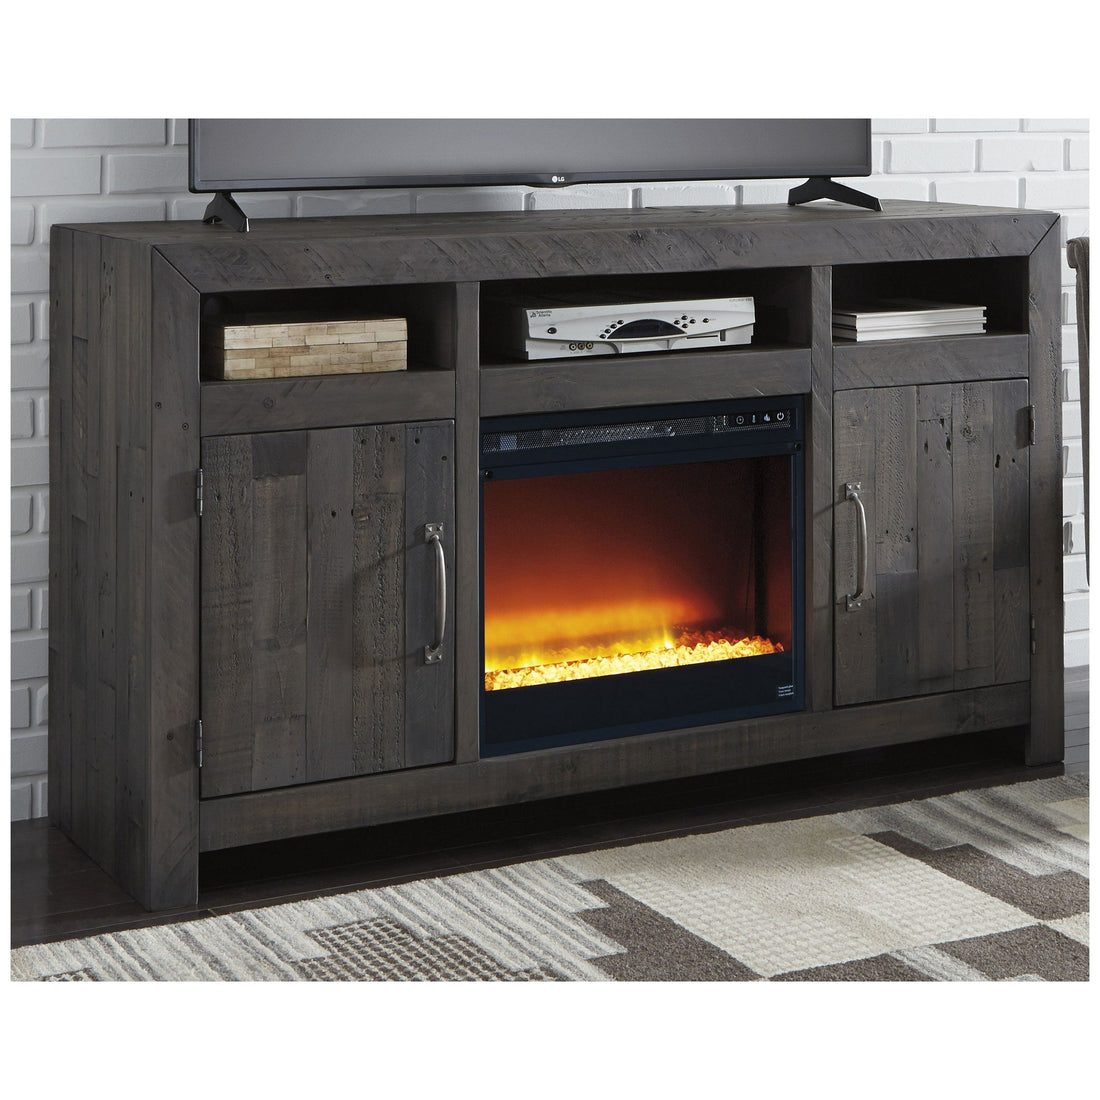 Mayflyn Large TV Stand with Fireplace Ash-W729W4